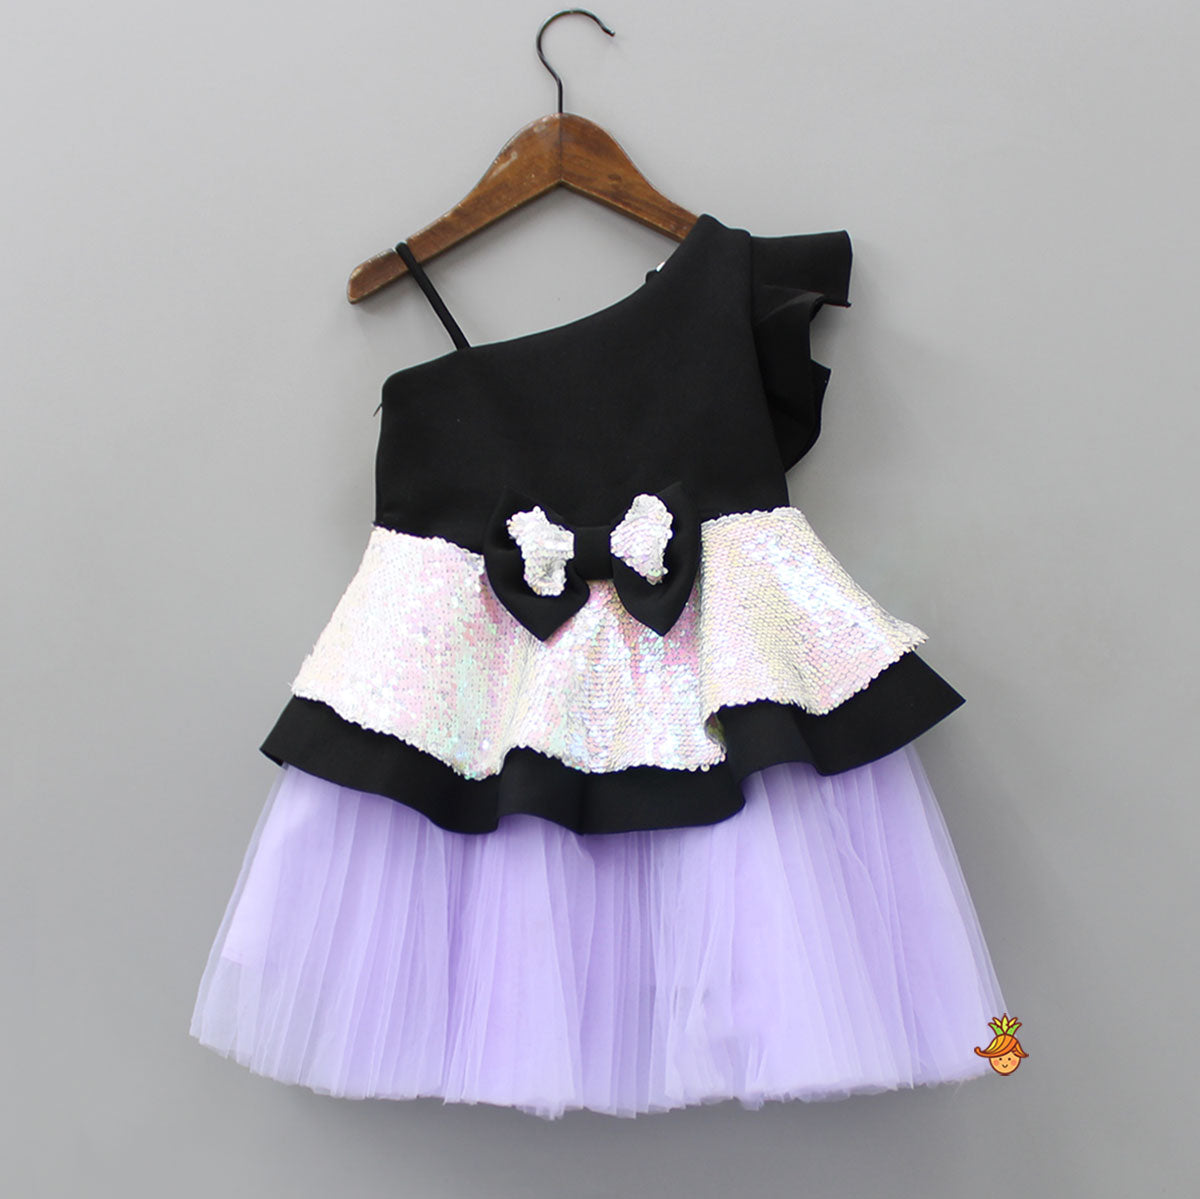 Pre Order: Sequins Embellished Peplum Dress With Net Bottom And Matching Bowie Hair Clip